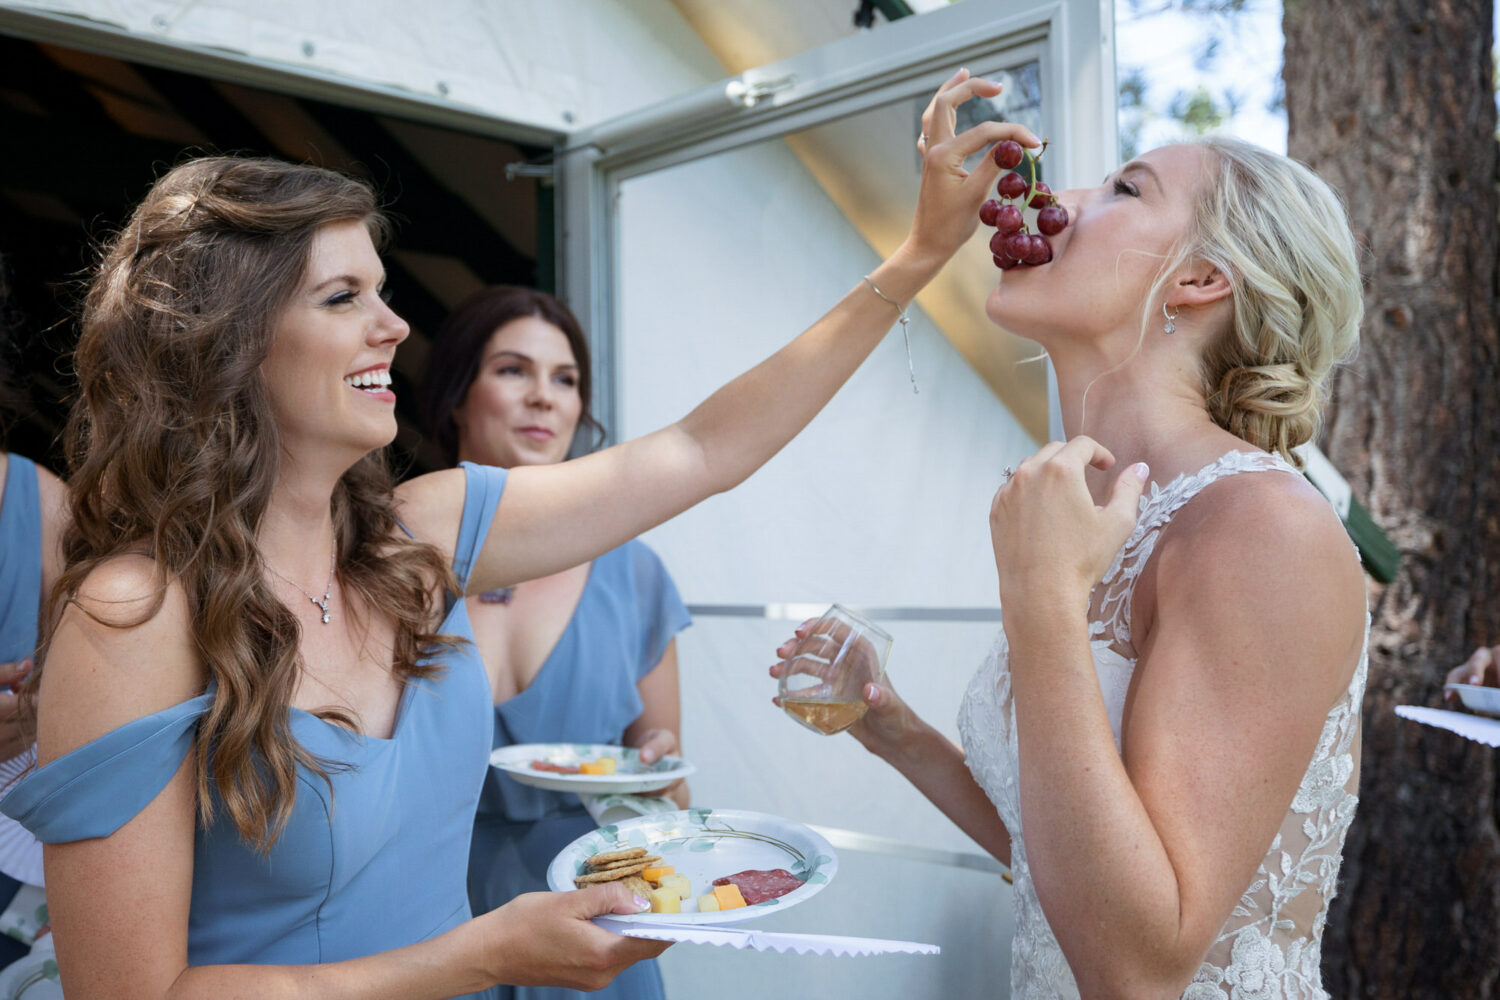 A bridesmaid helps the bride stay fed and hydrated by feeding her red grapes and a plate with cheese and crackers.